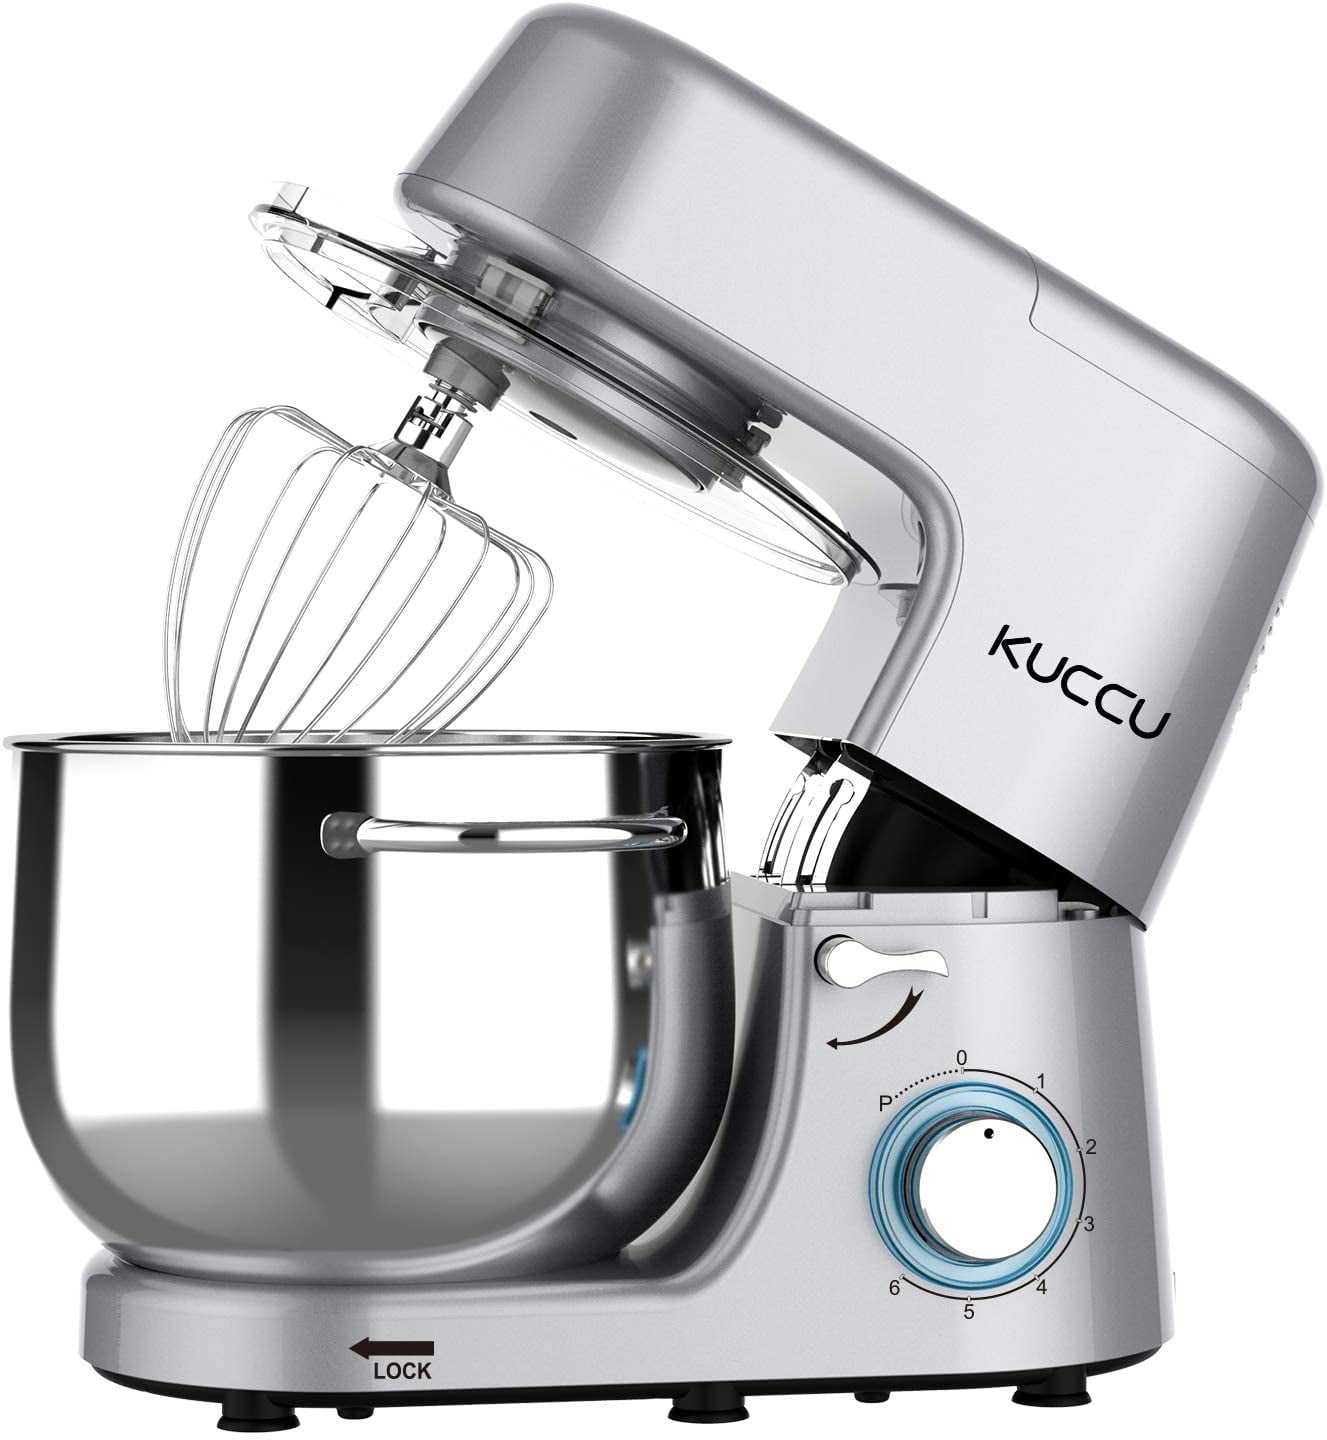  8.5 QT Double Handle KUCCU Stand Mixer, 6 Speed with Pulse  Electric Kitchen Mixer, 660W Tilt-Head Food Mixer with Dishwasher-Safe  Dough Hook, Flat Beater, Whisk, Splash Guard for home baking (Silver)